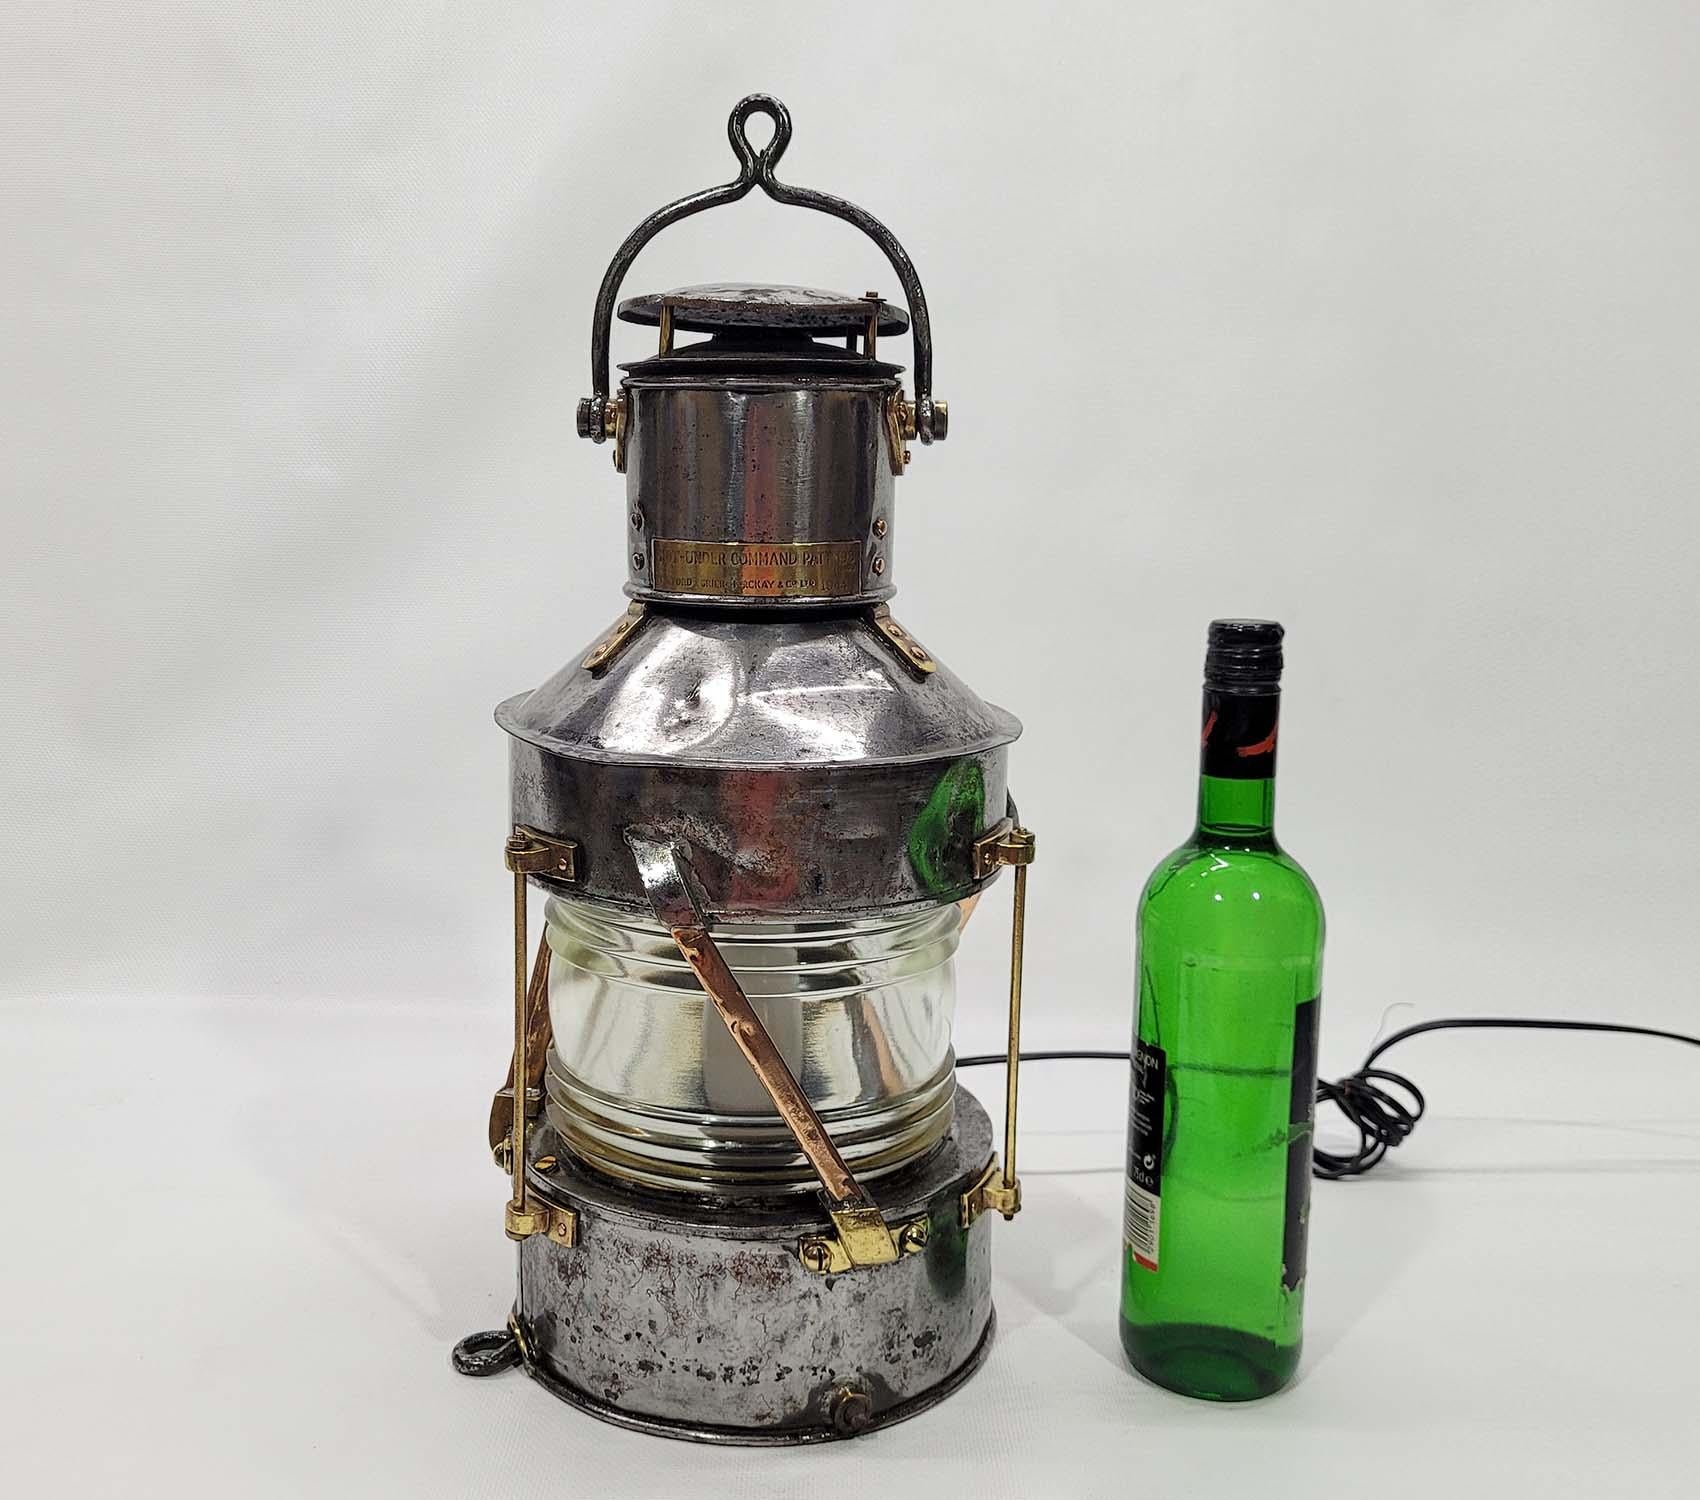 Anchor lantern from a boat of steel, copper and brass construction. Great piece of industrial lighting. Clear glass Fresnel lens. Copper bars. Brass trim. Vented top. Rewired with new socket. This lantern has been stripped, polished, and lacquered